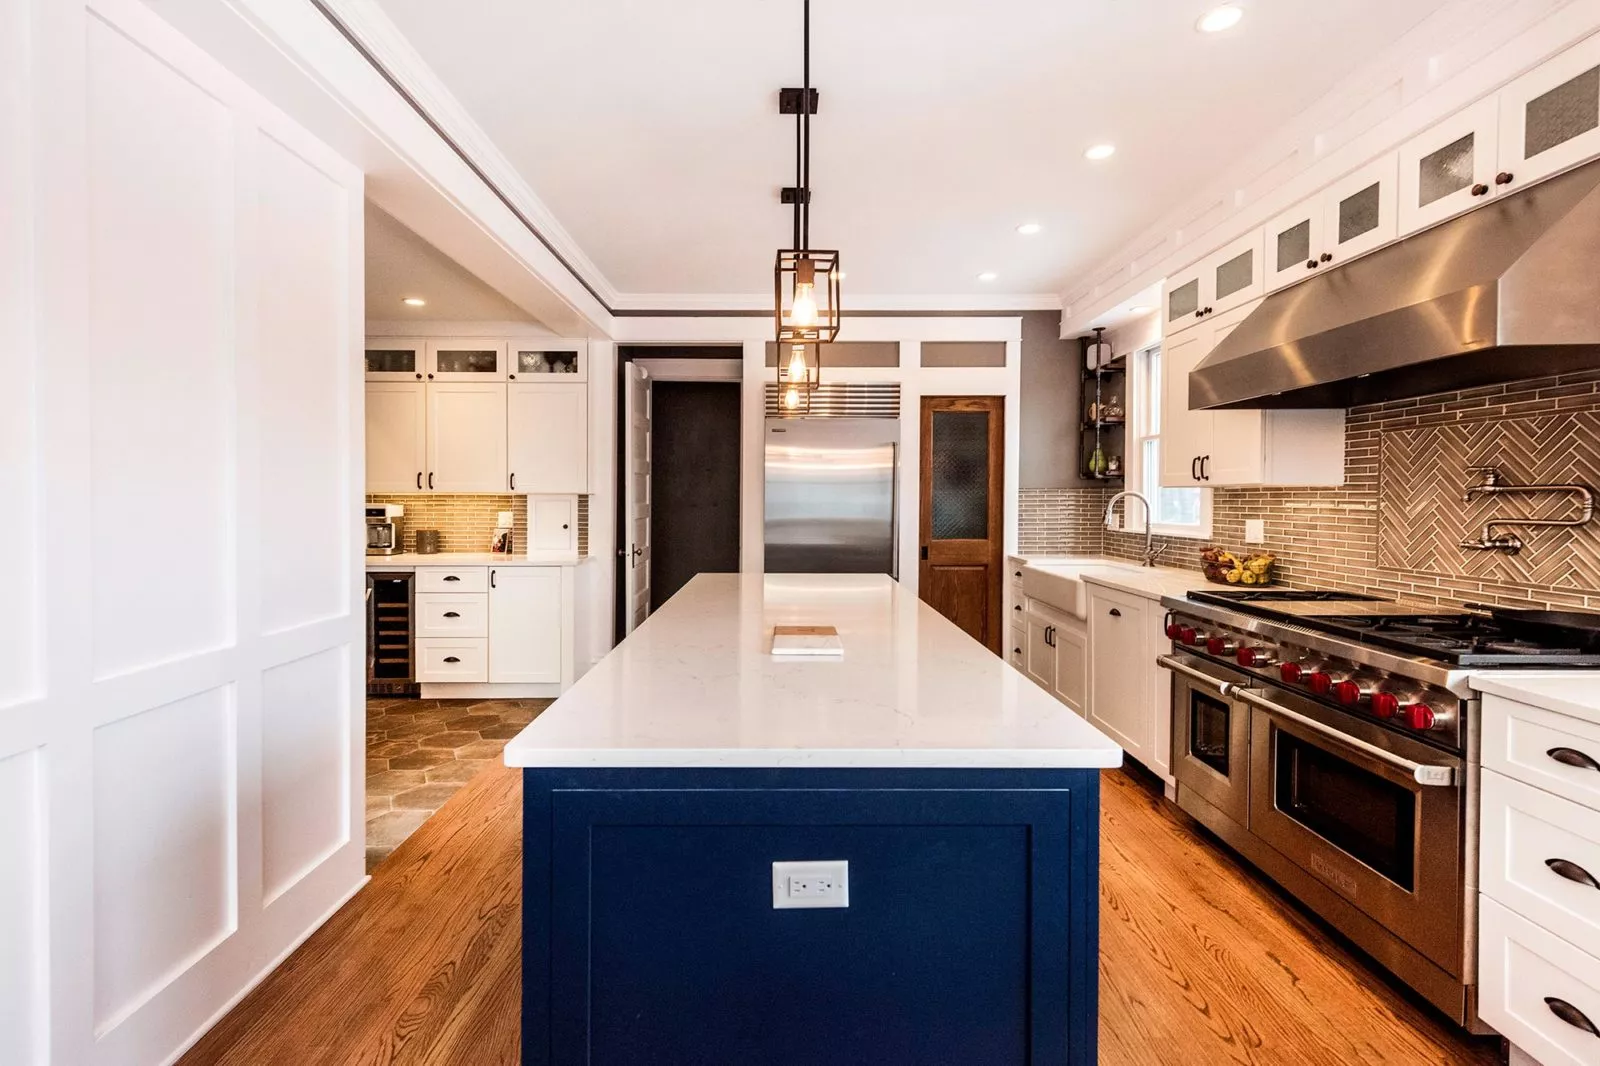 Updated kitchen with black caged iron lights over navy blue white granite-topped island, stainless steel double ovens & fume hood, white cabinets, & brown-tiled statement backsplash